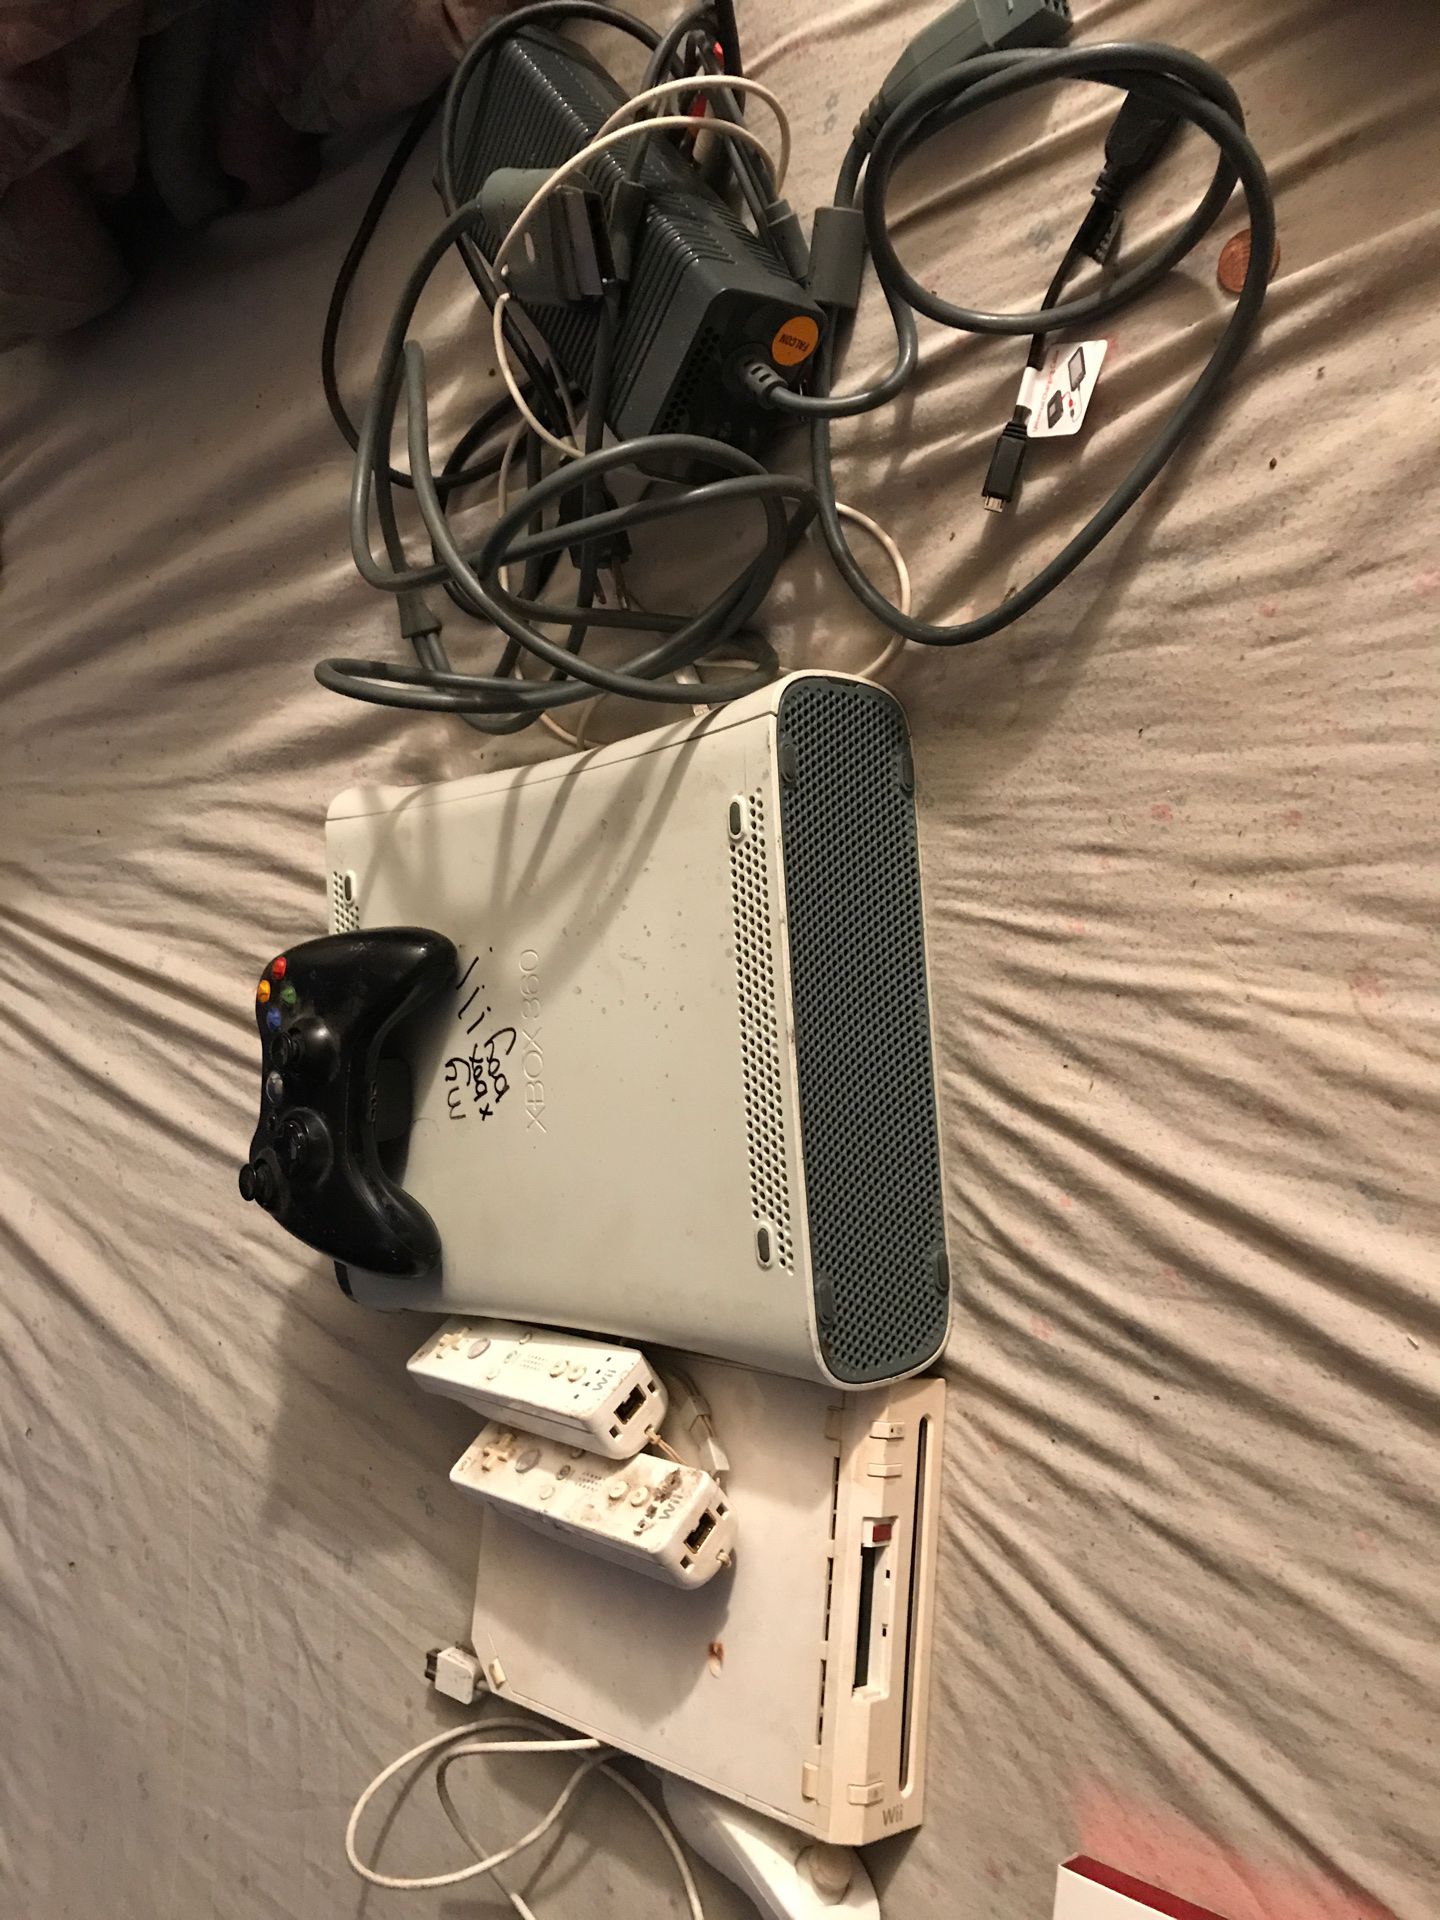 Xbox 360 wii I got ps4 don’t need both work wii needs cords